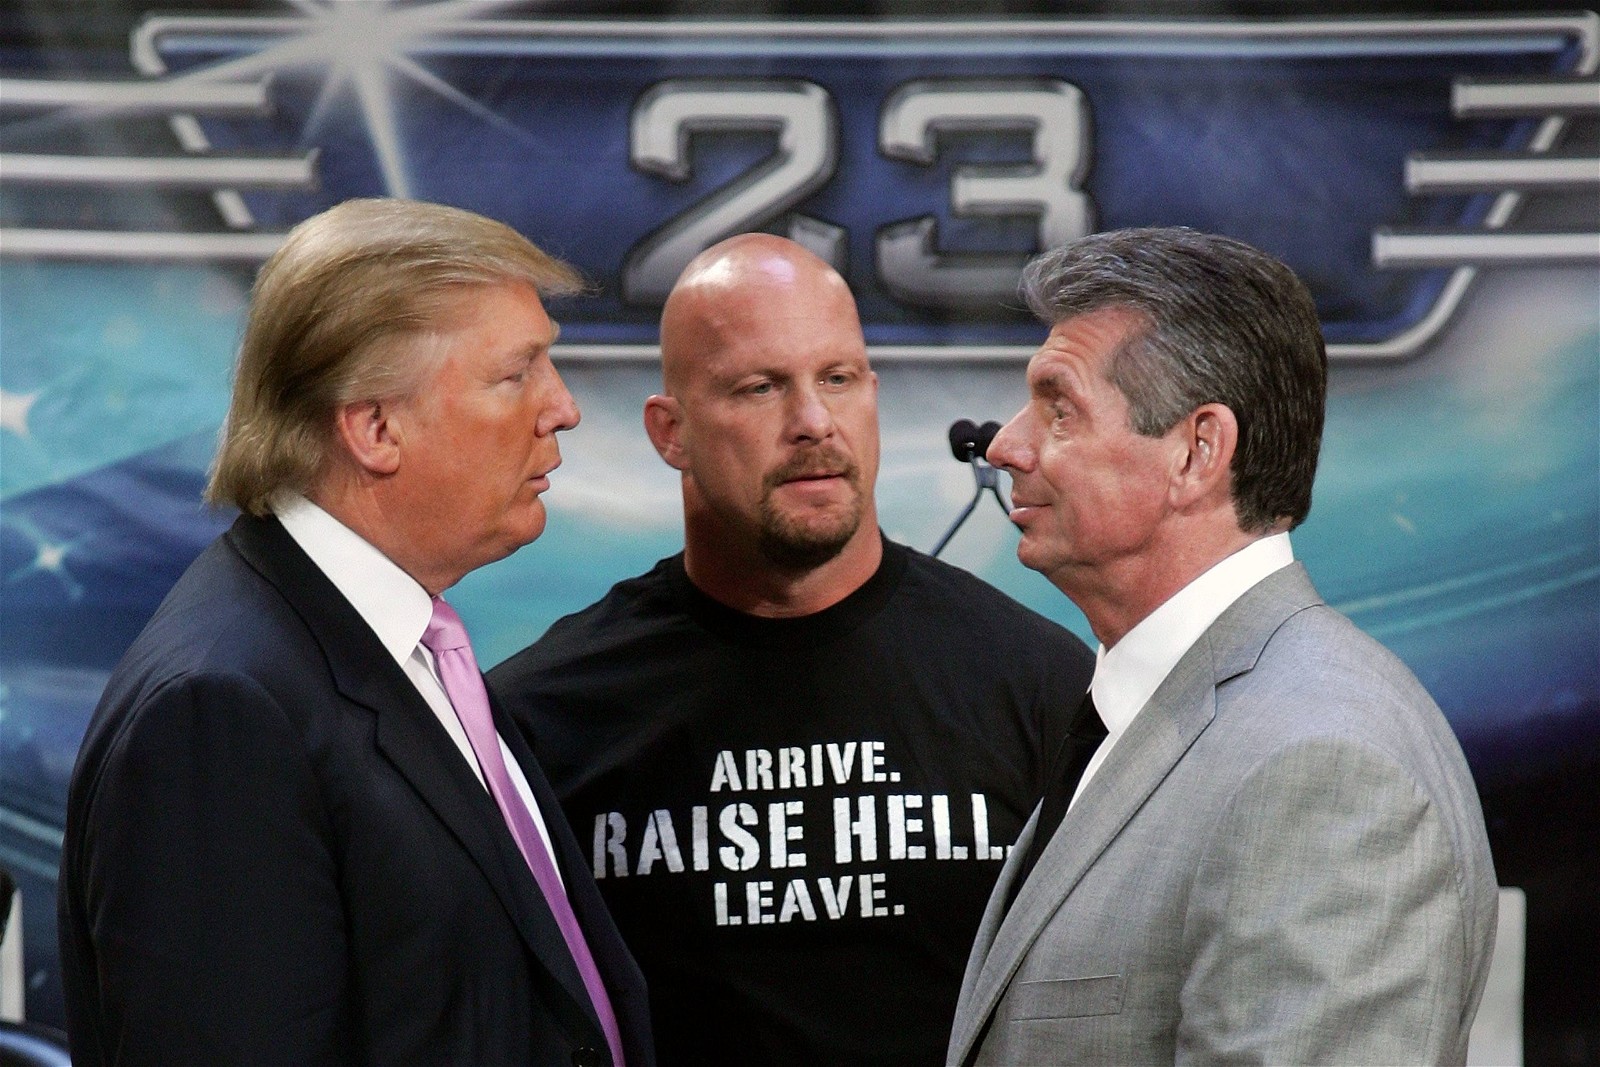 Donald Trump and Vince McMahon along with Steve Austin during a press conference before the WrestleMania 23 match